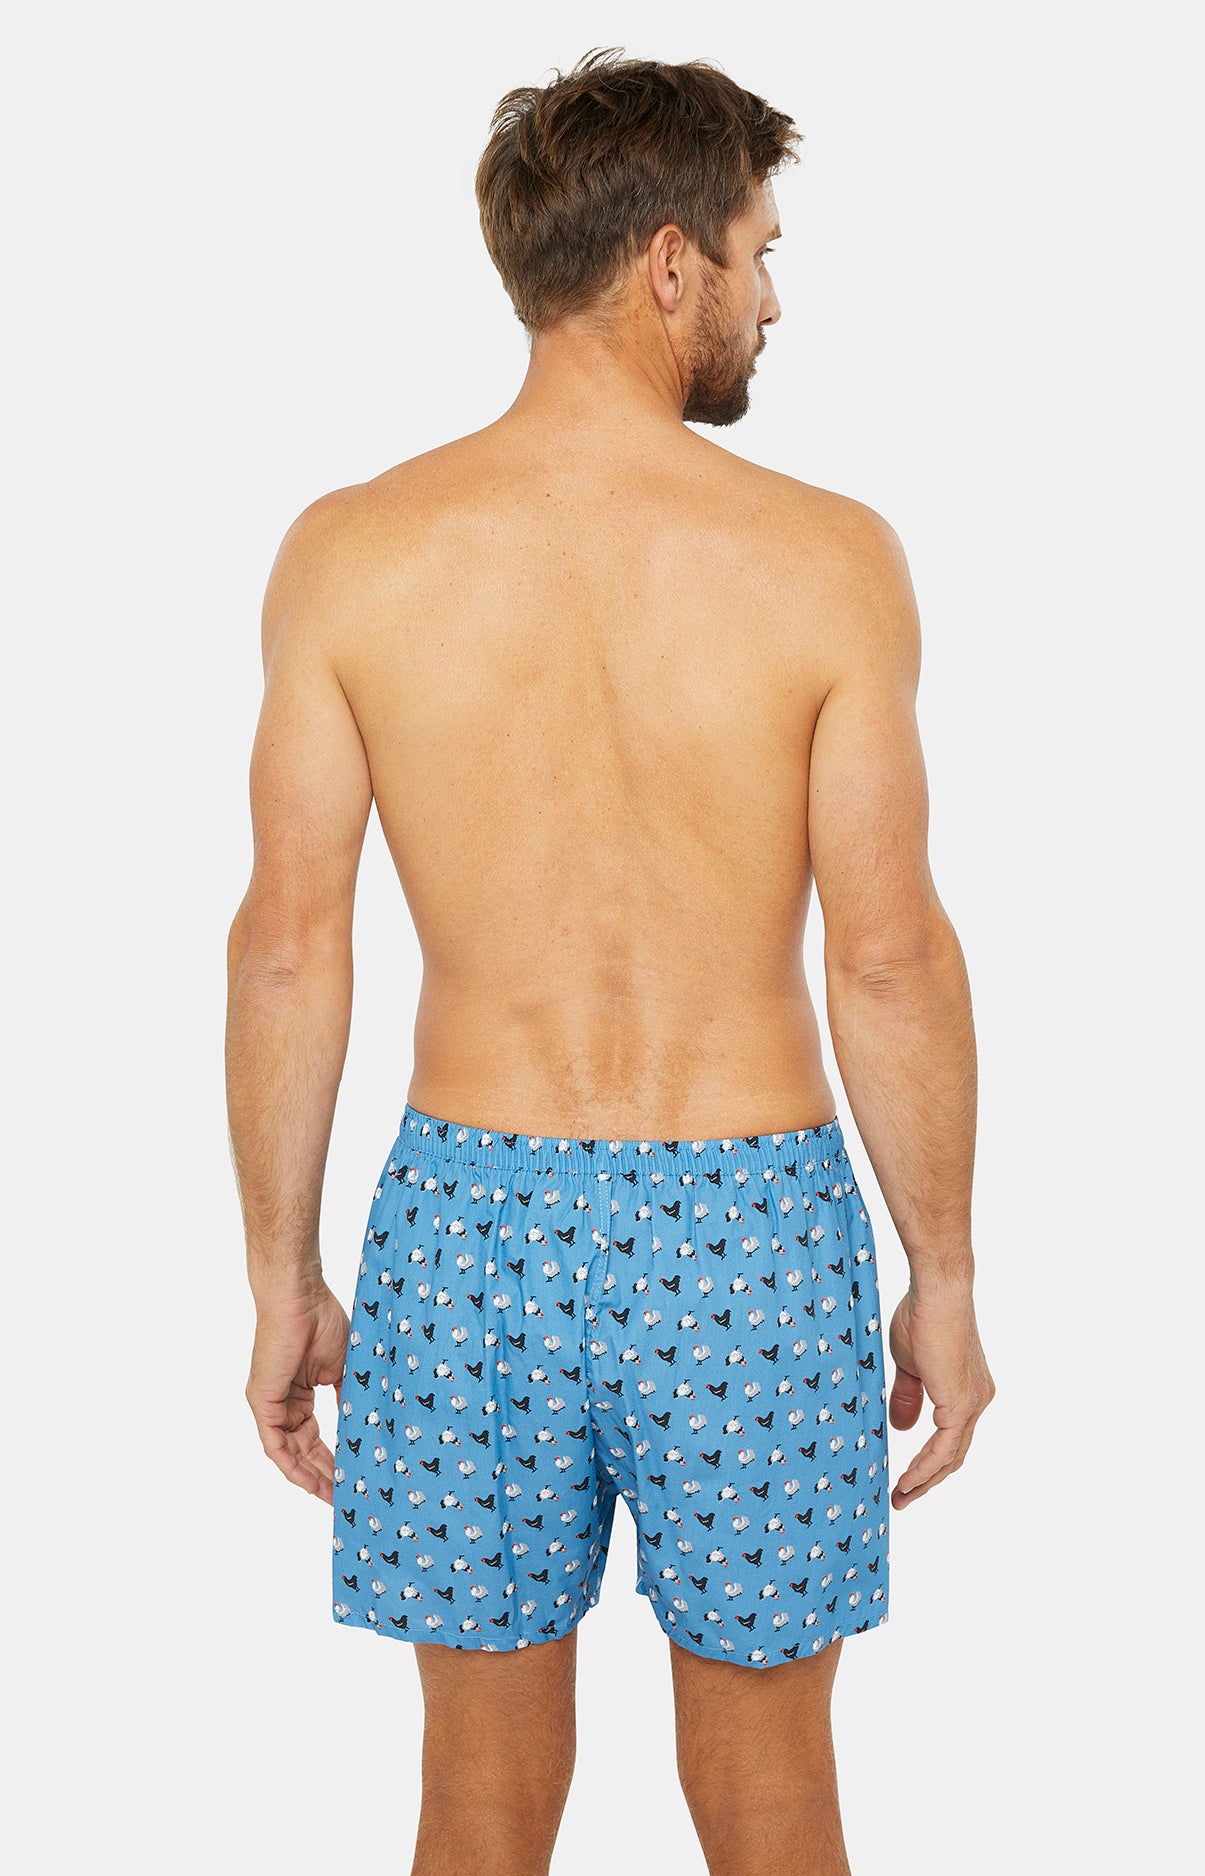 Classic boxer underpant - Chicken